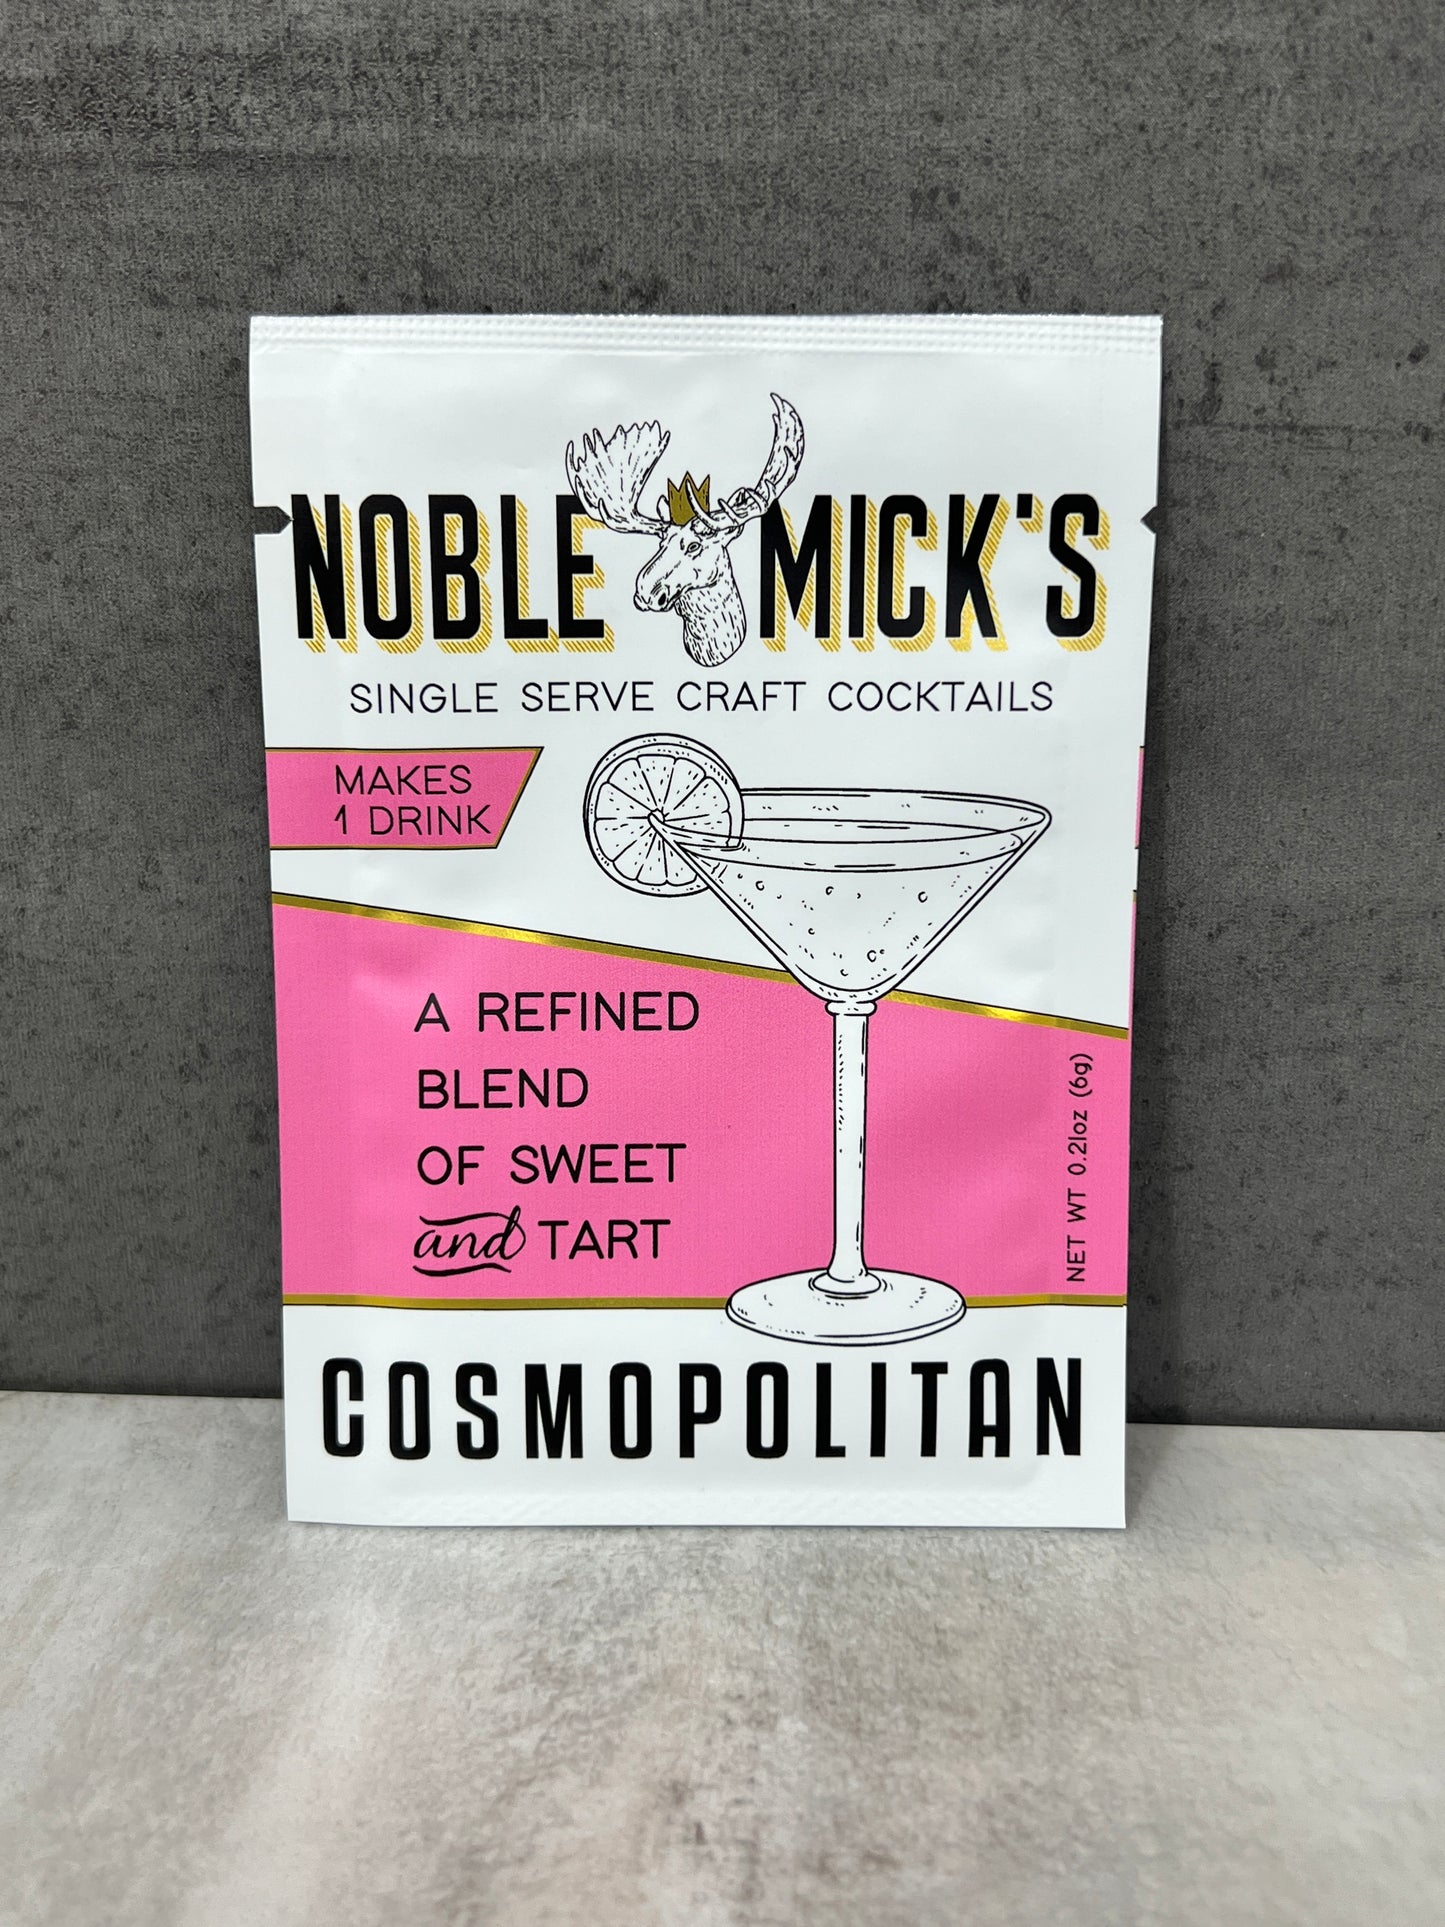 Noble Mick's Drink Mixes